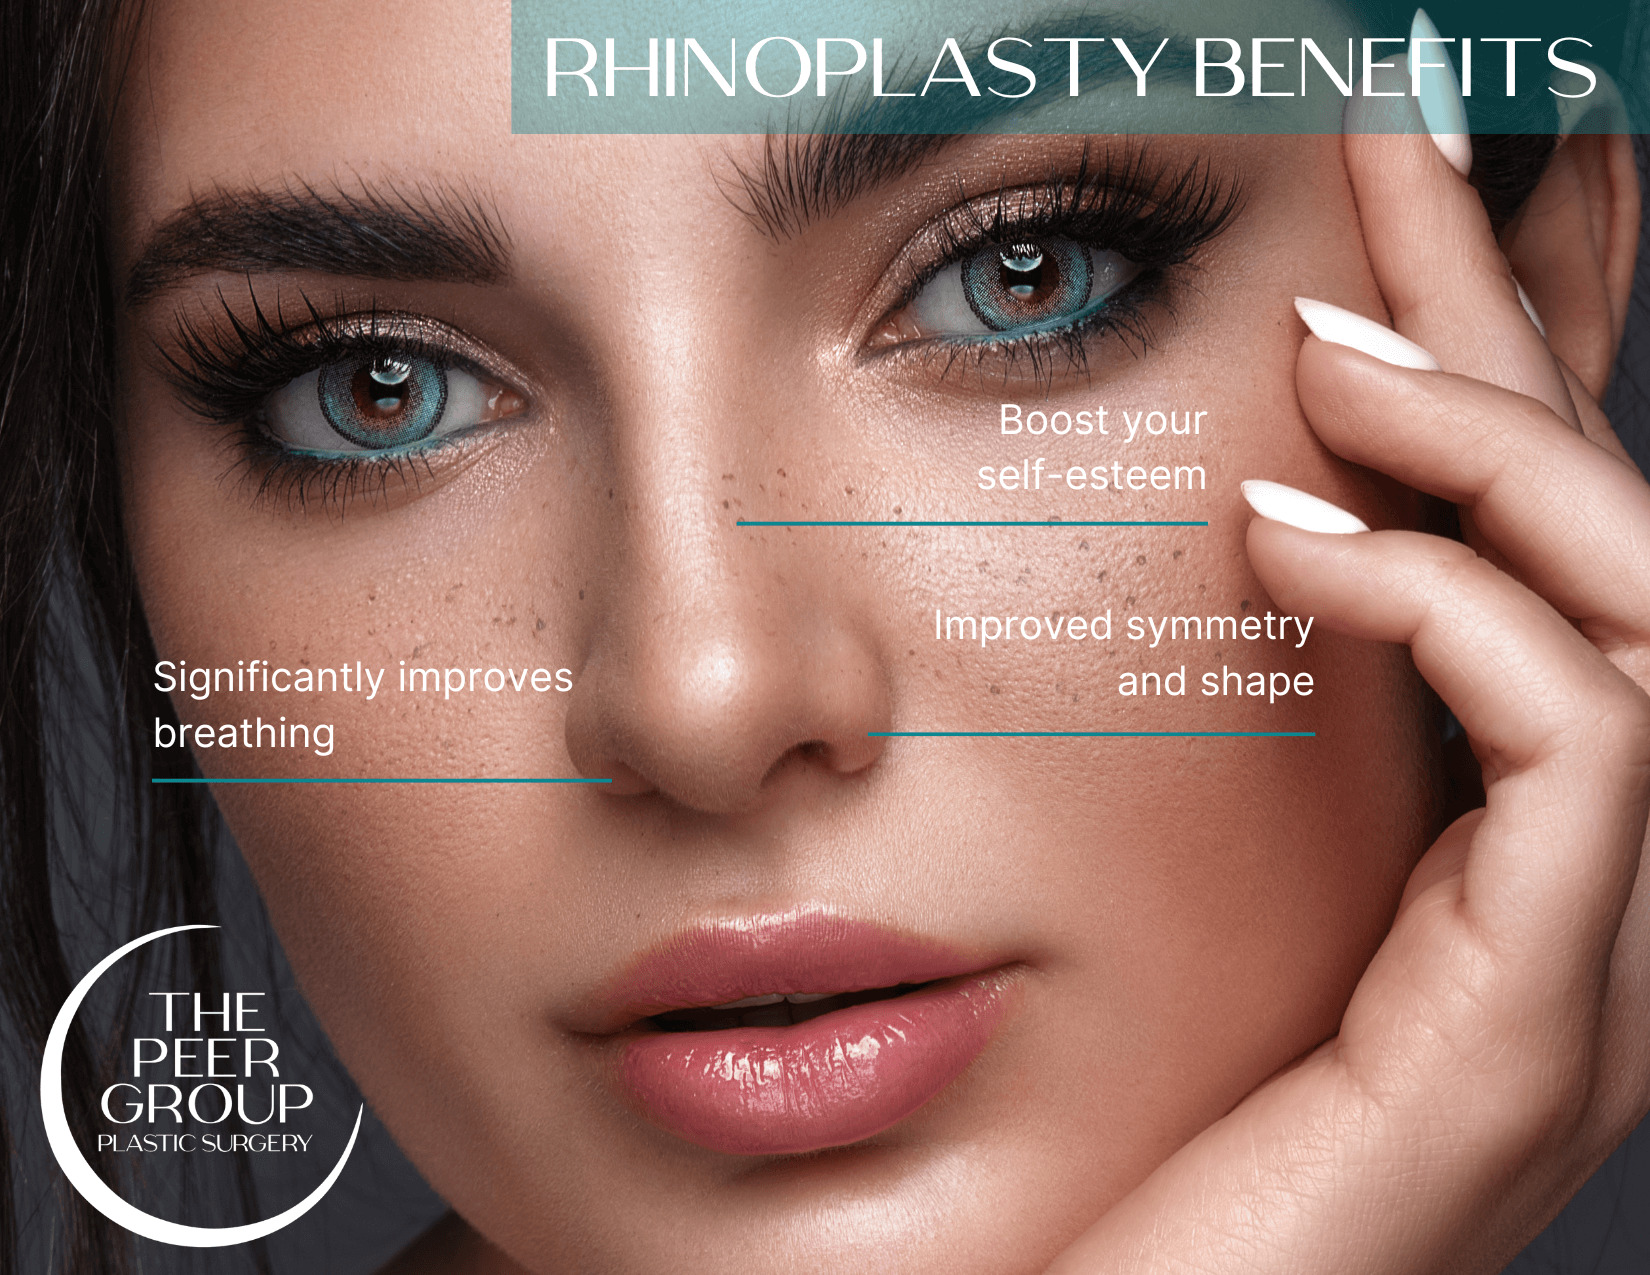 See the benefits of rhinoplasty at New Jersey’s The Peer Group